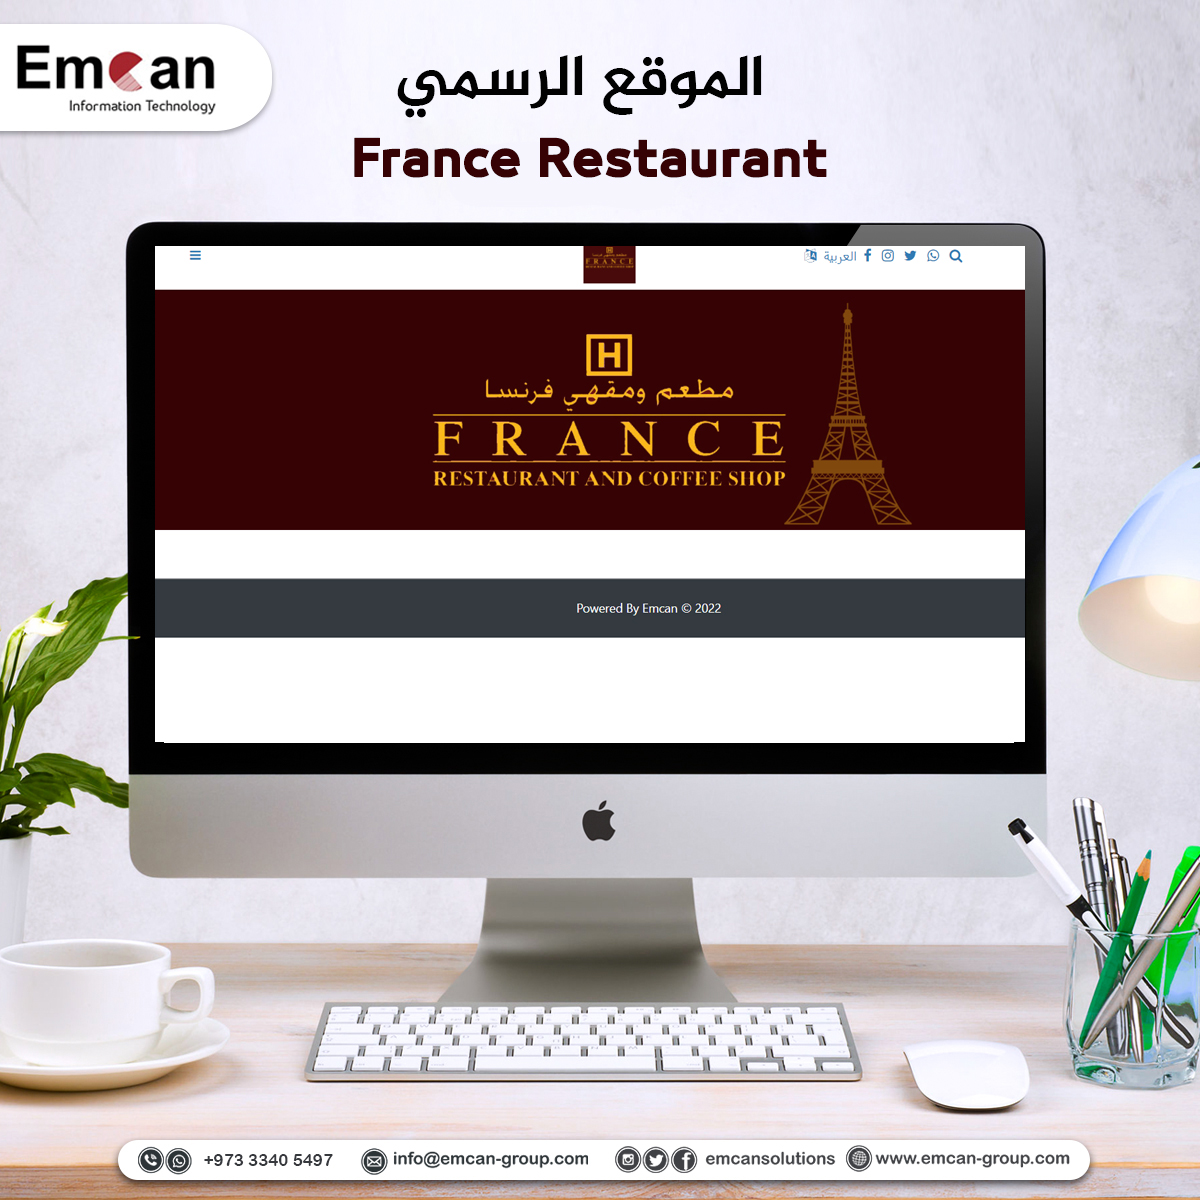 France Restaurant and Coffee Shop website